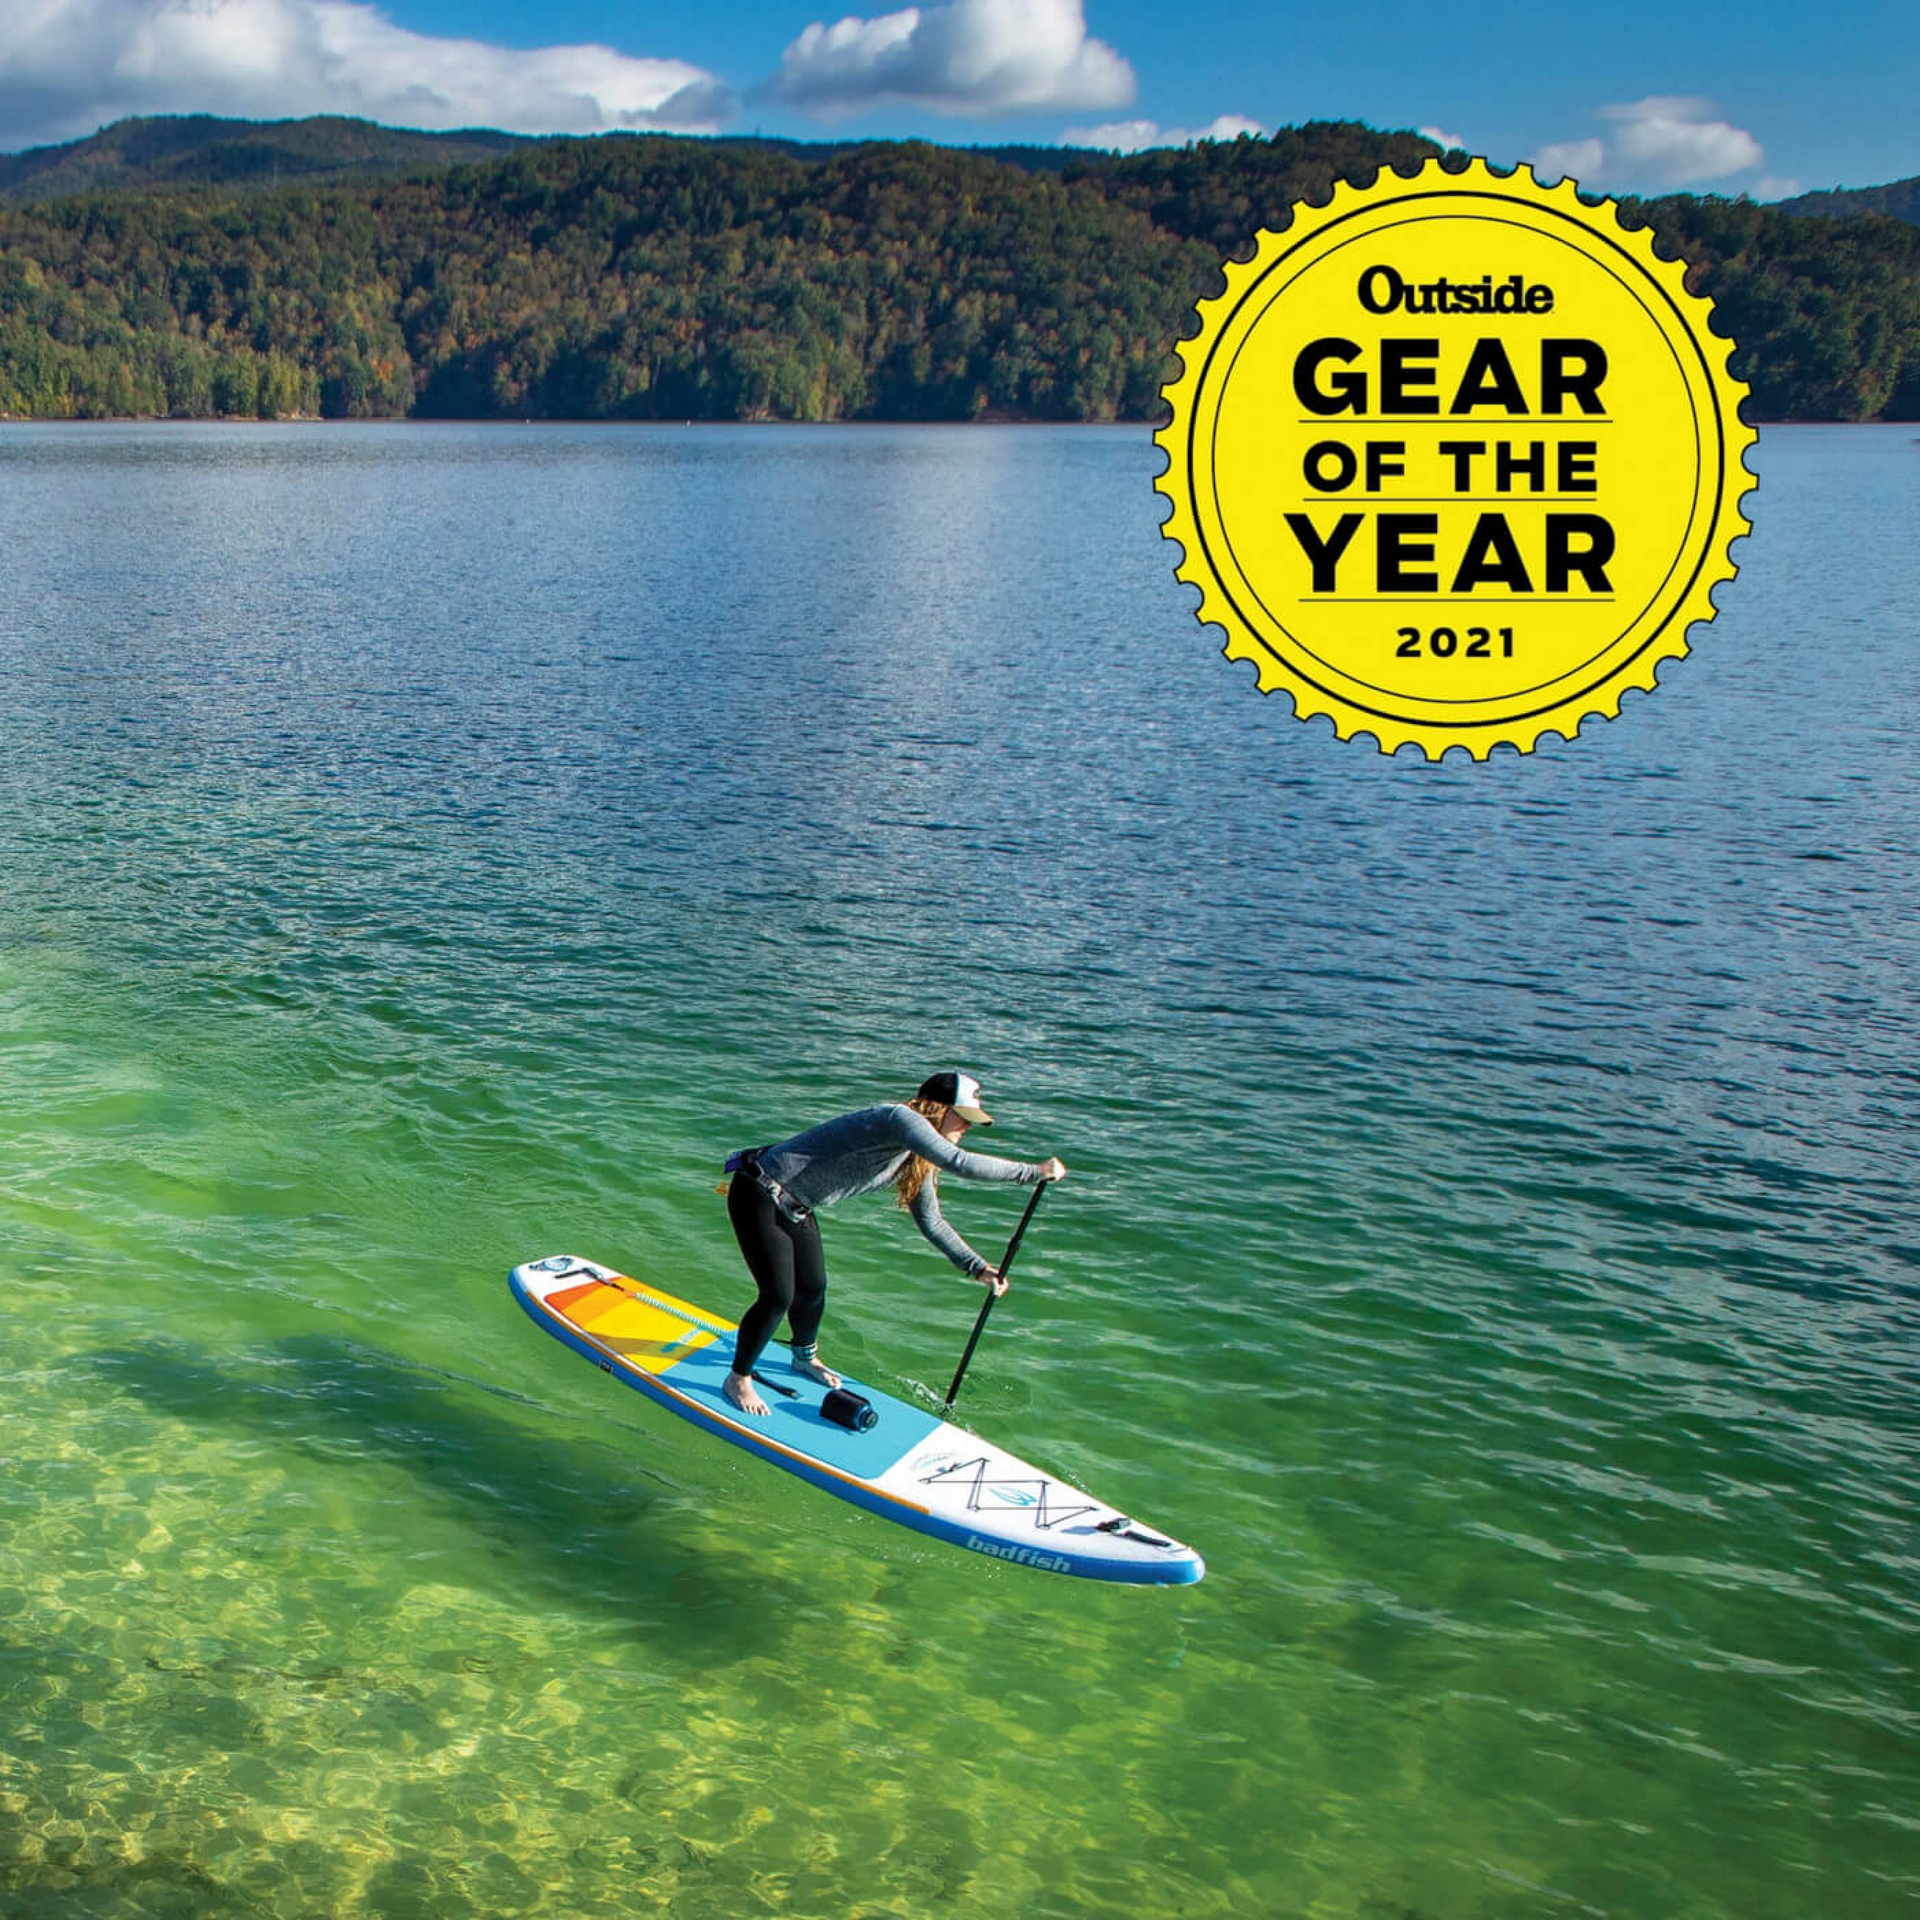 INTRODUCING THE FLYWEIGHT AND WINNER OF OUTSIDE MAGAZINE’S GEAR OF THE YEAR AWARD